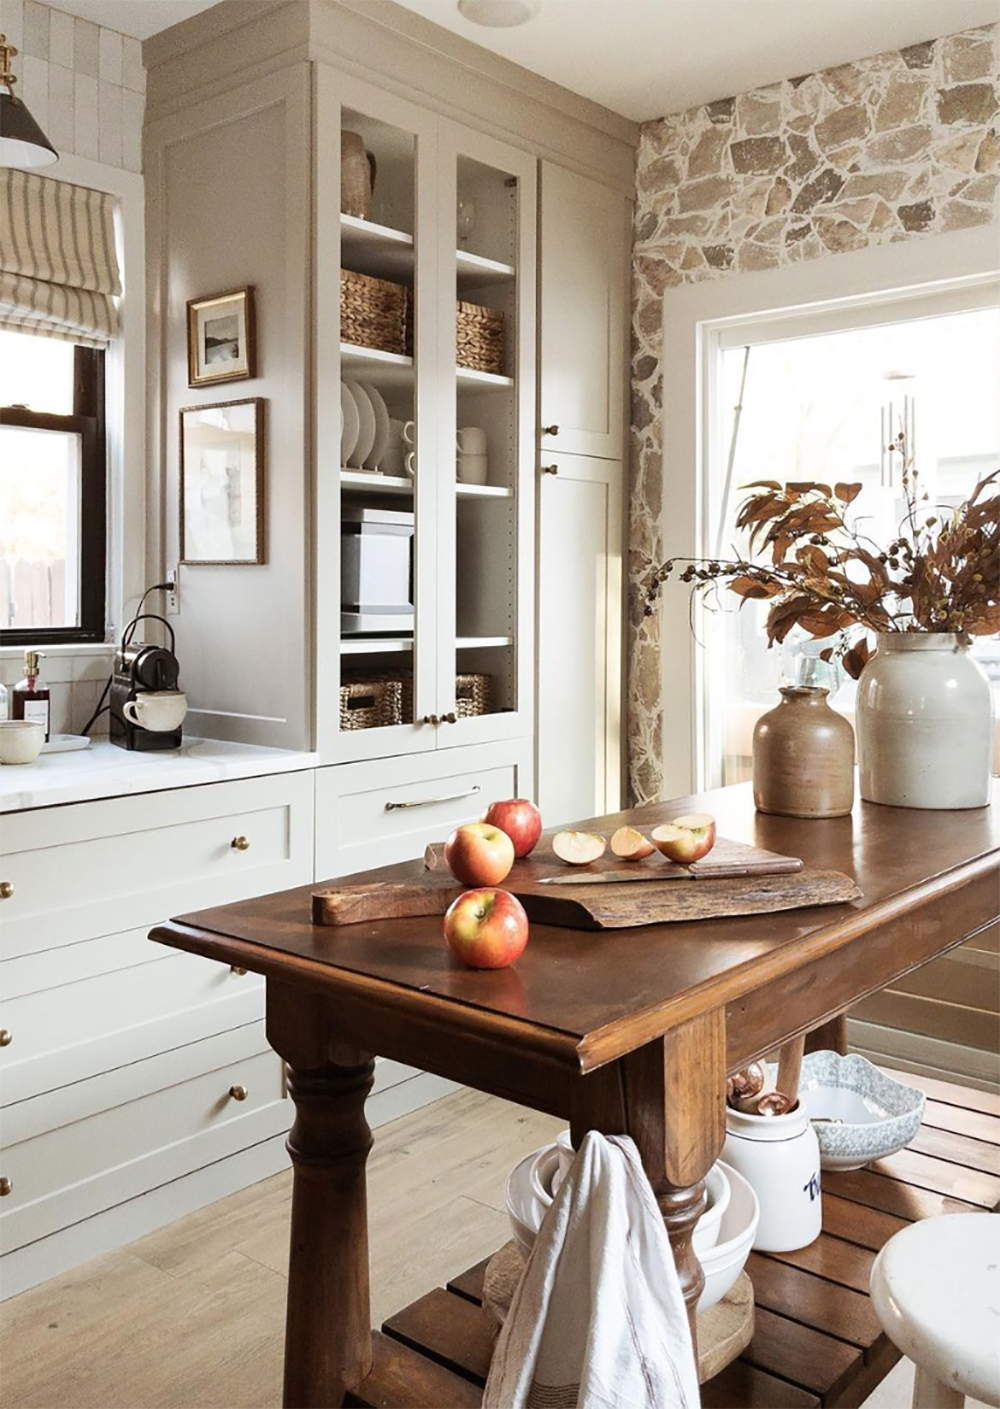 Love dreaming of my future kitchen and I have gathered up my absolute favorite repurposed kitchen island ideas and inspiration! Browse them now over KaraLayne.com.